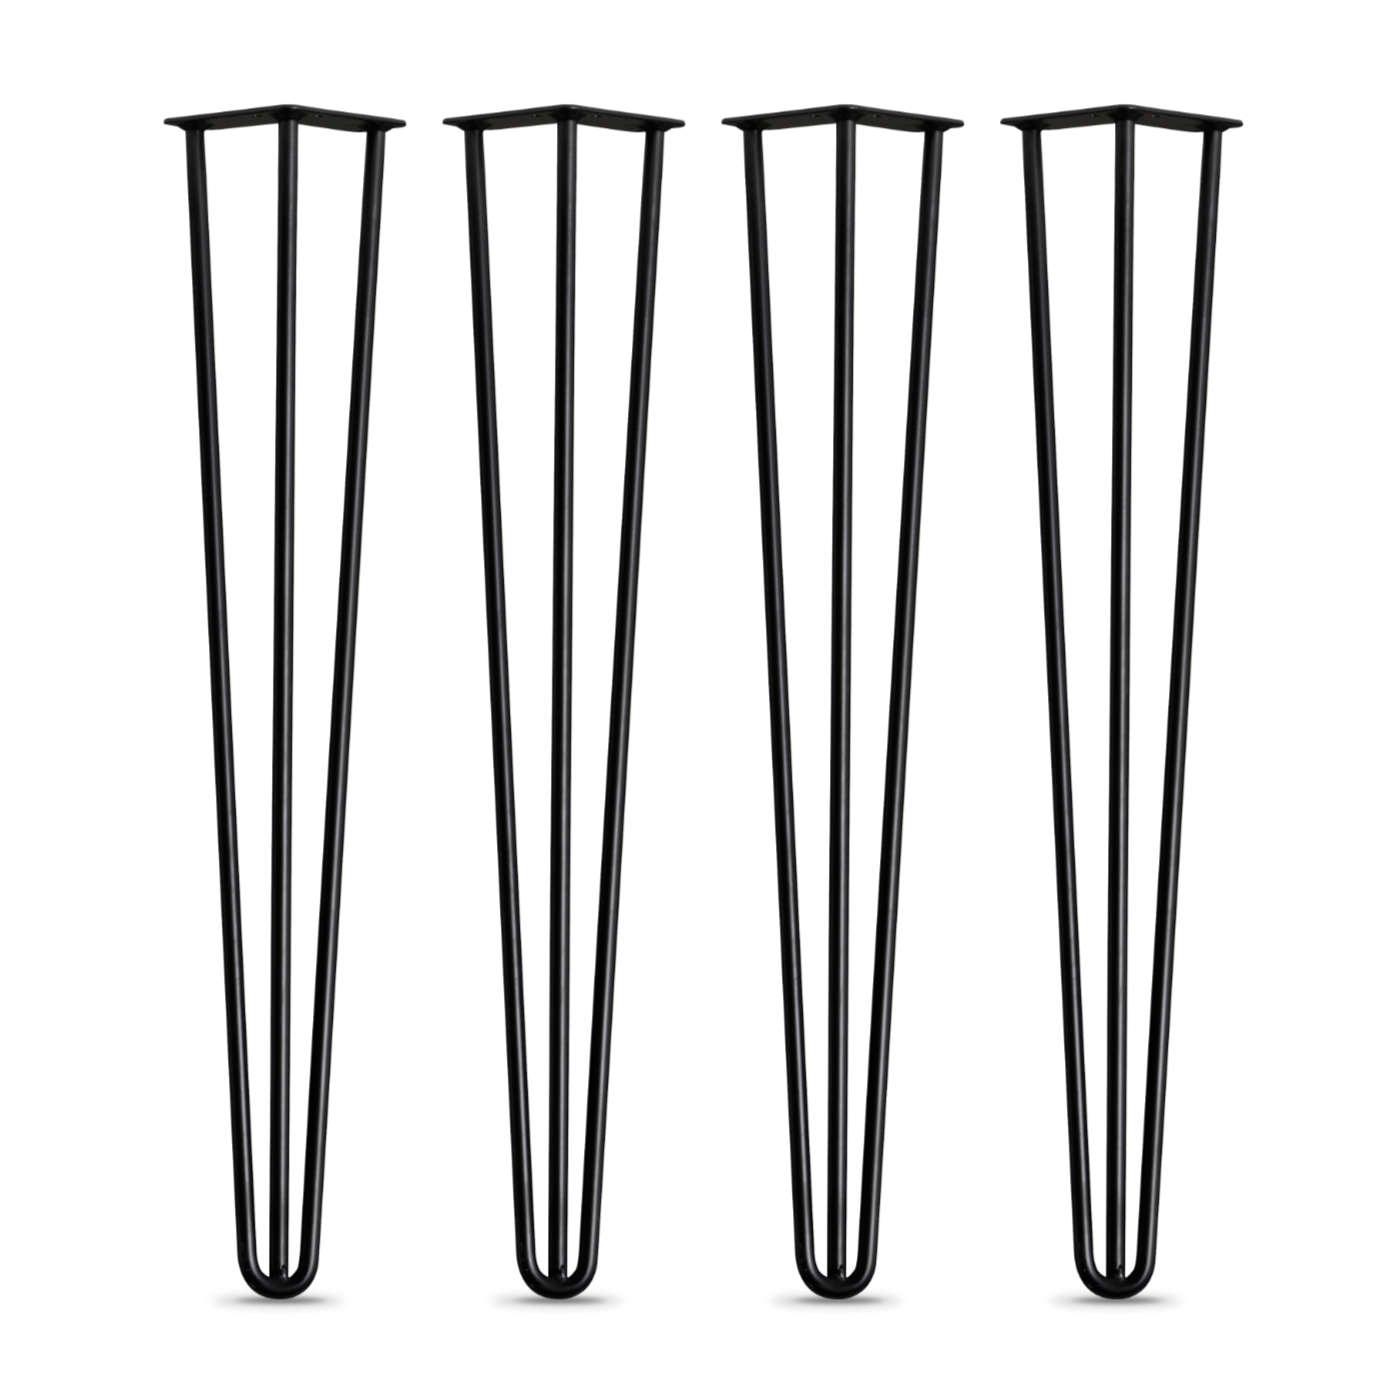 Black 28"/16" Solid Steel 3-Rod Hairpin Legs for Tables/Benches - RizAndMicaMake